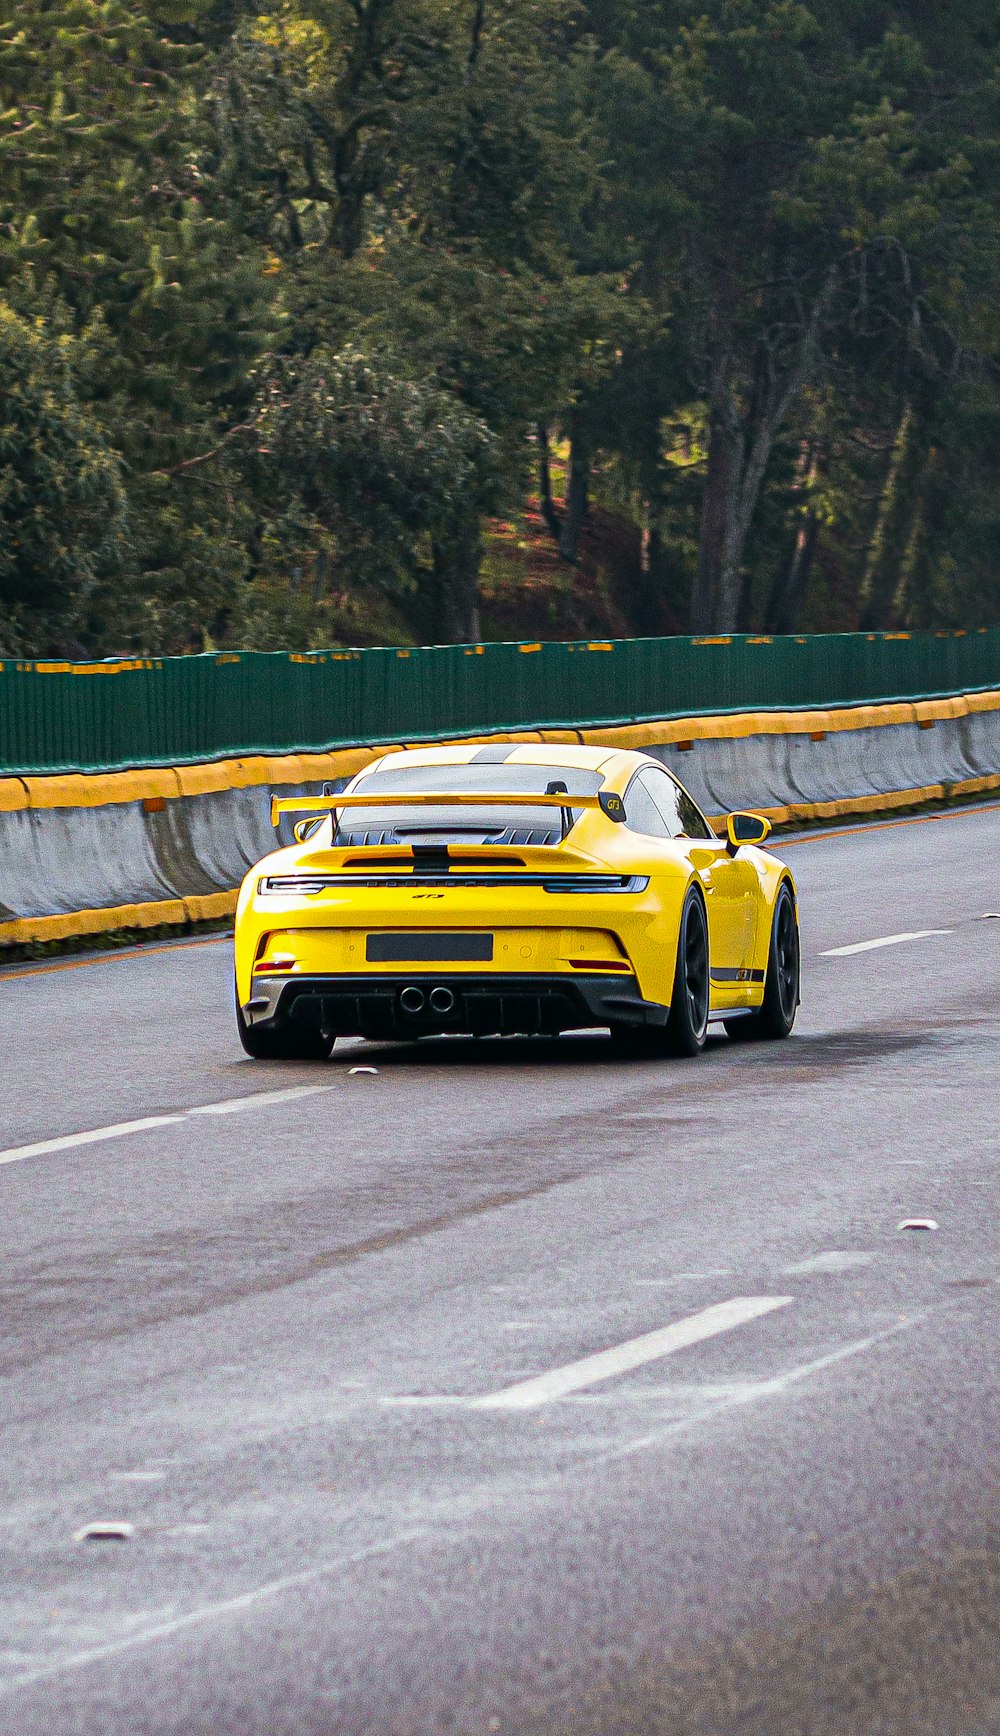 a yellow and black race car on a road with trees on the side